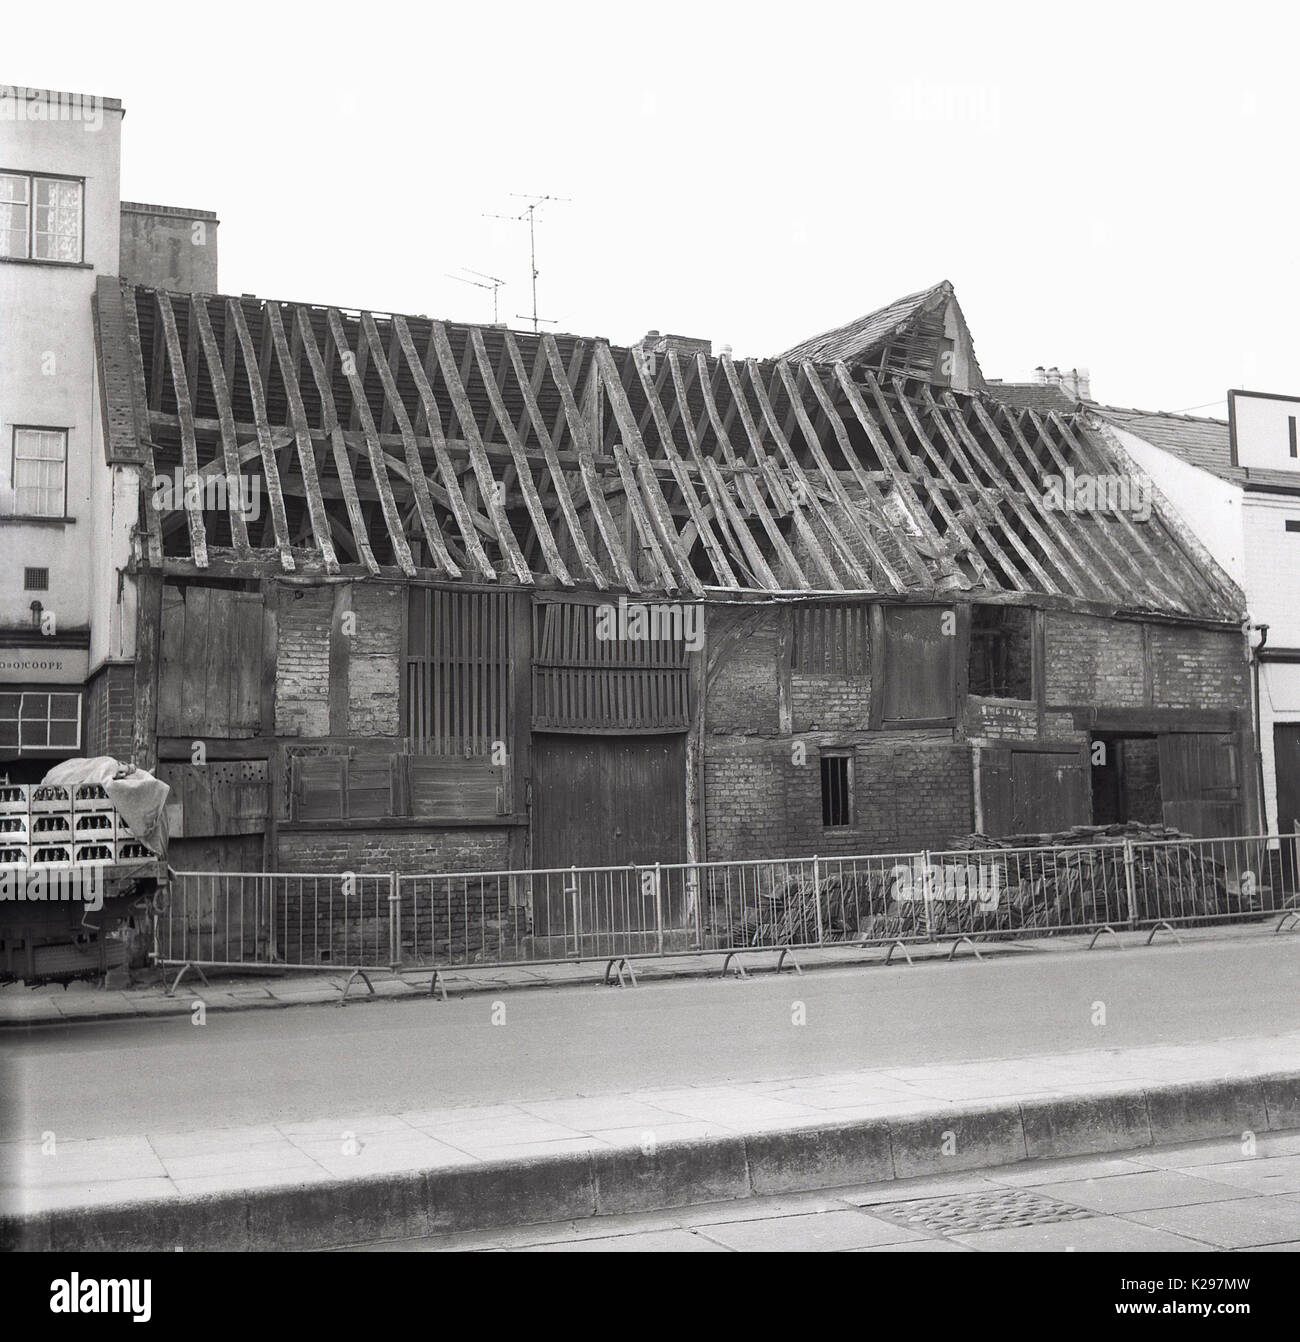 1960s, historical, picture shows exterior view of an ancient brick built storage barn in an english market town with an unsafe roof, its old wooden rafters are exposed to the elements with no tiles or coverings,  England, UK. Stock Photo